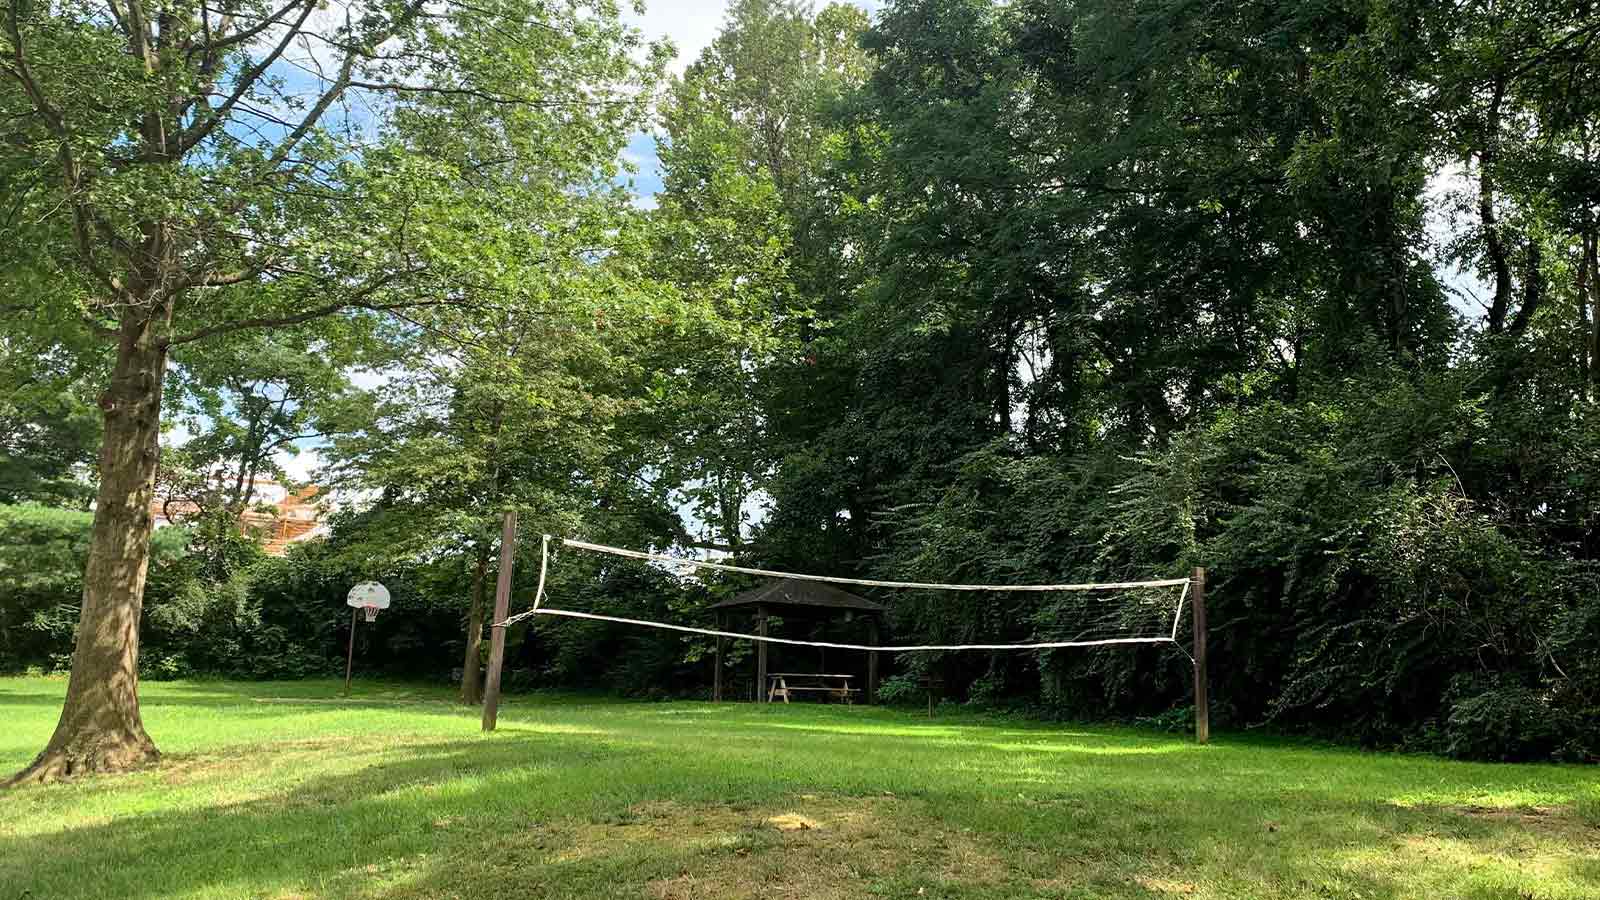 A serene outdoor area with a volleyball net set up among tall trees and a lush lawn.